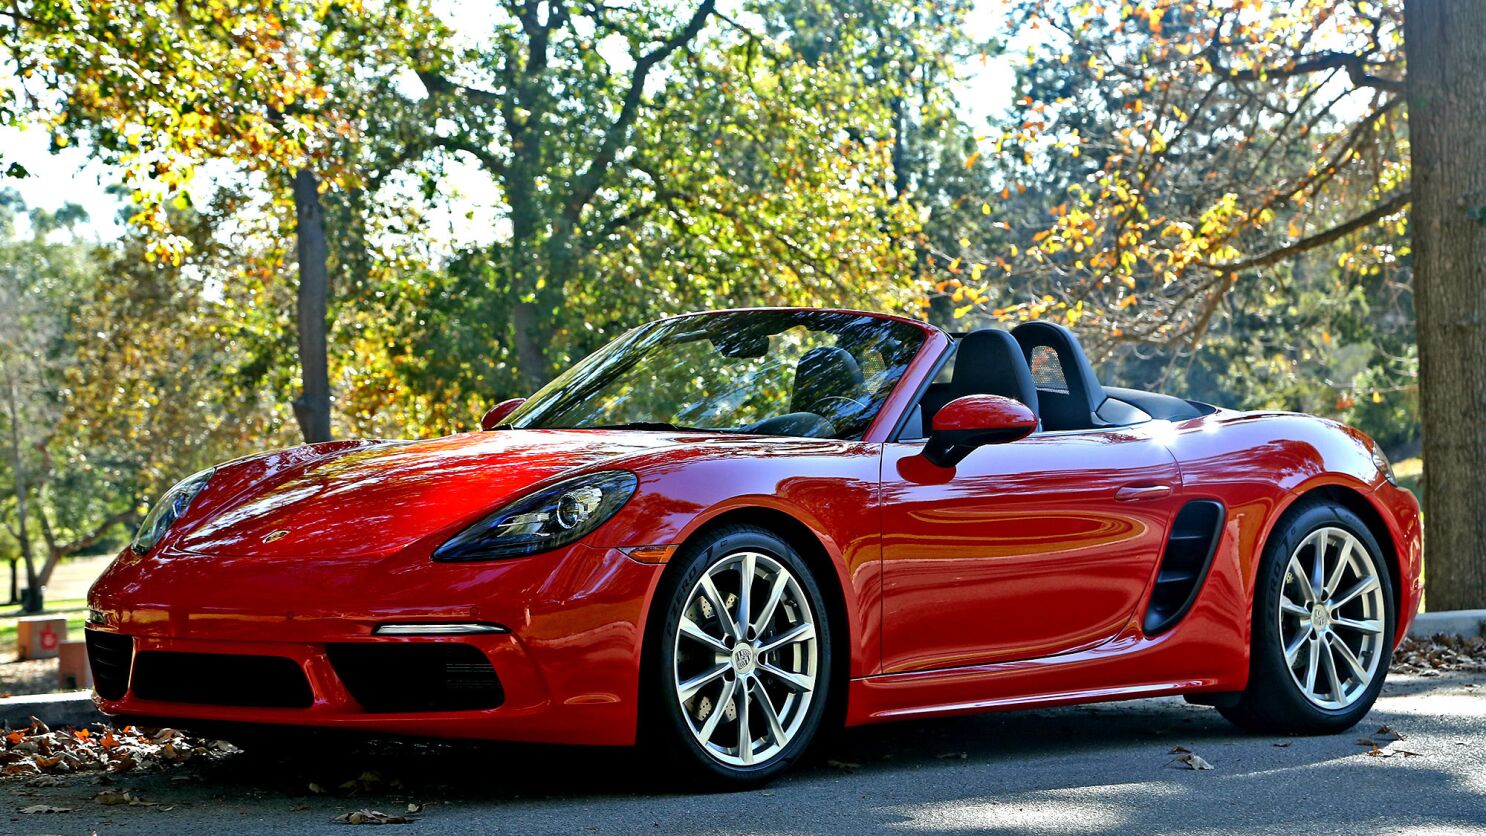 Porsche's new Boxster is fast, fun to drive and, for a Porsche, affordable  - Los Angeles Times